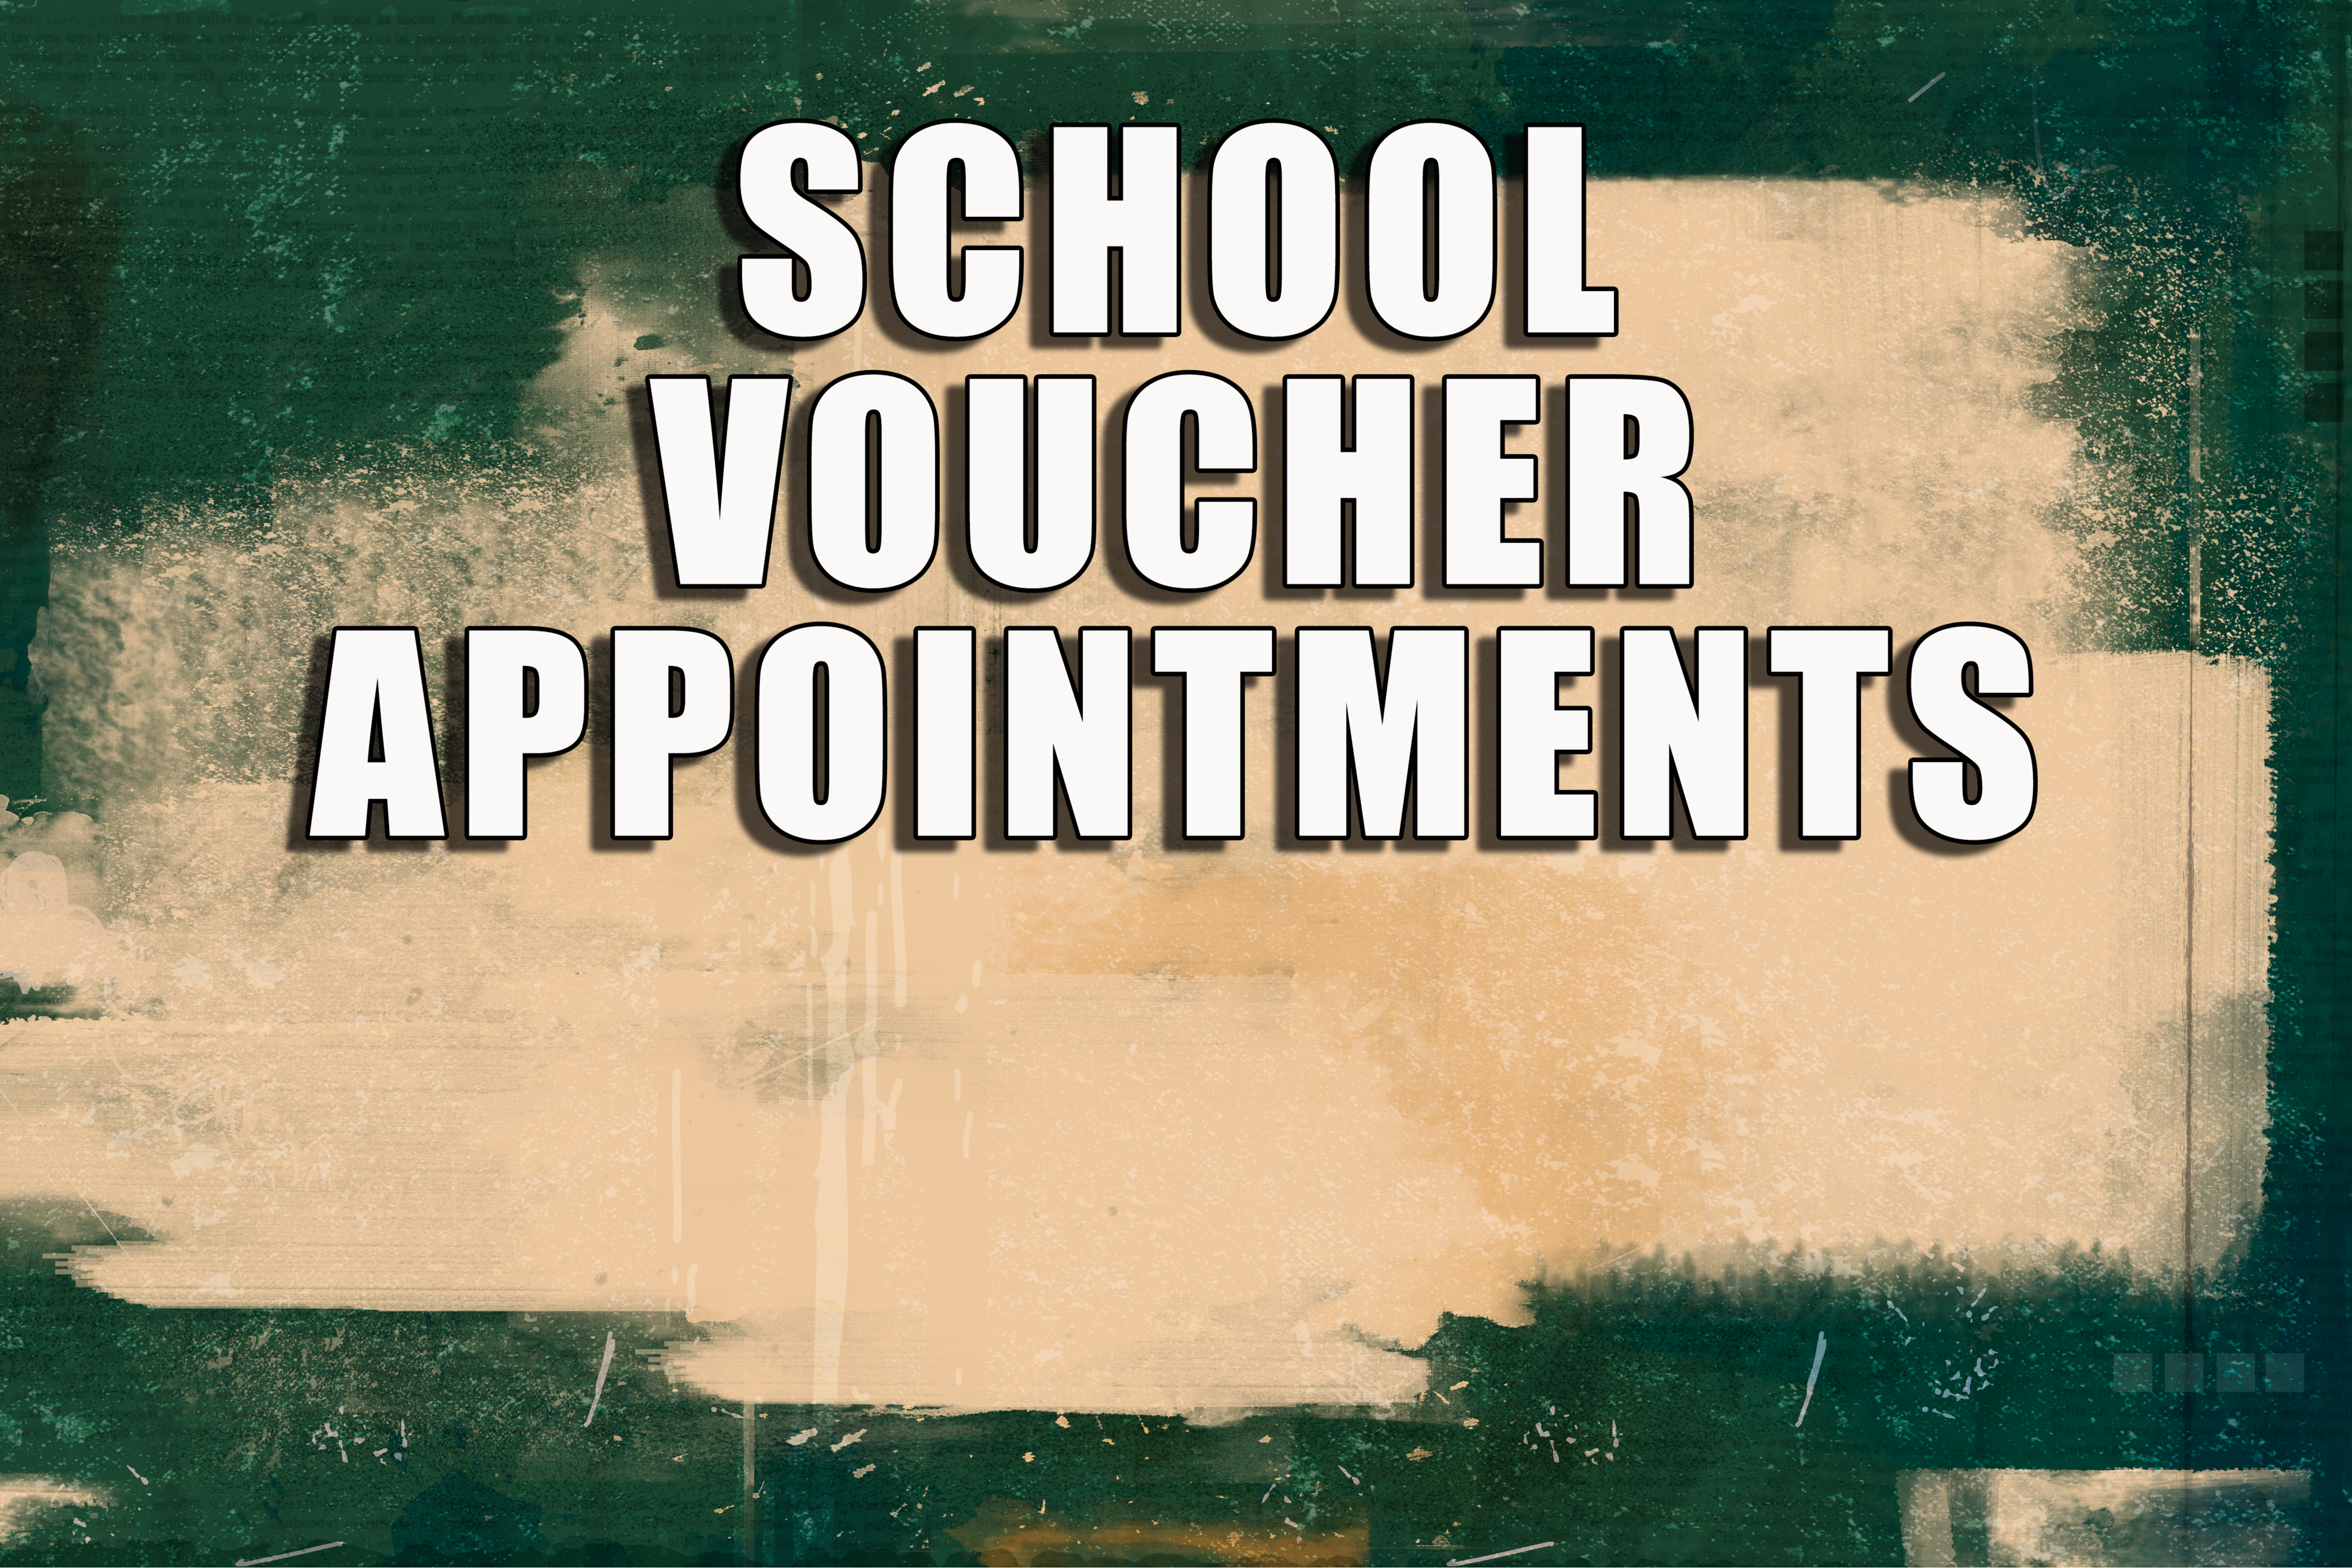 School Boucher Appointments